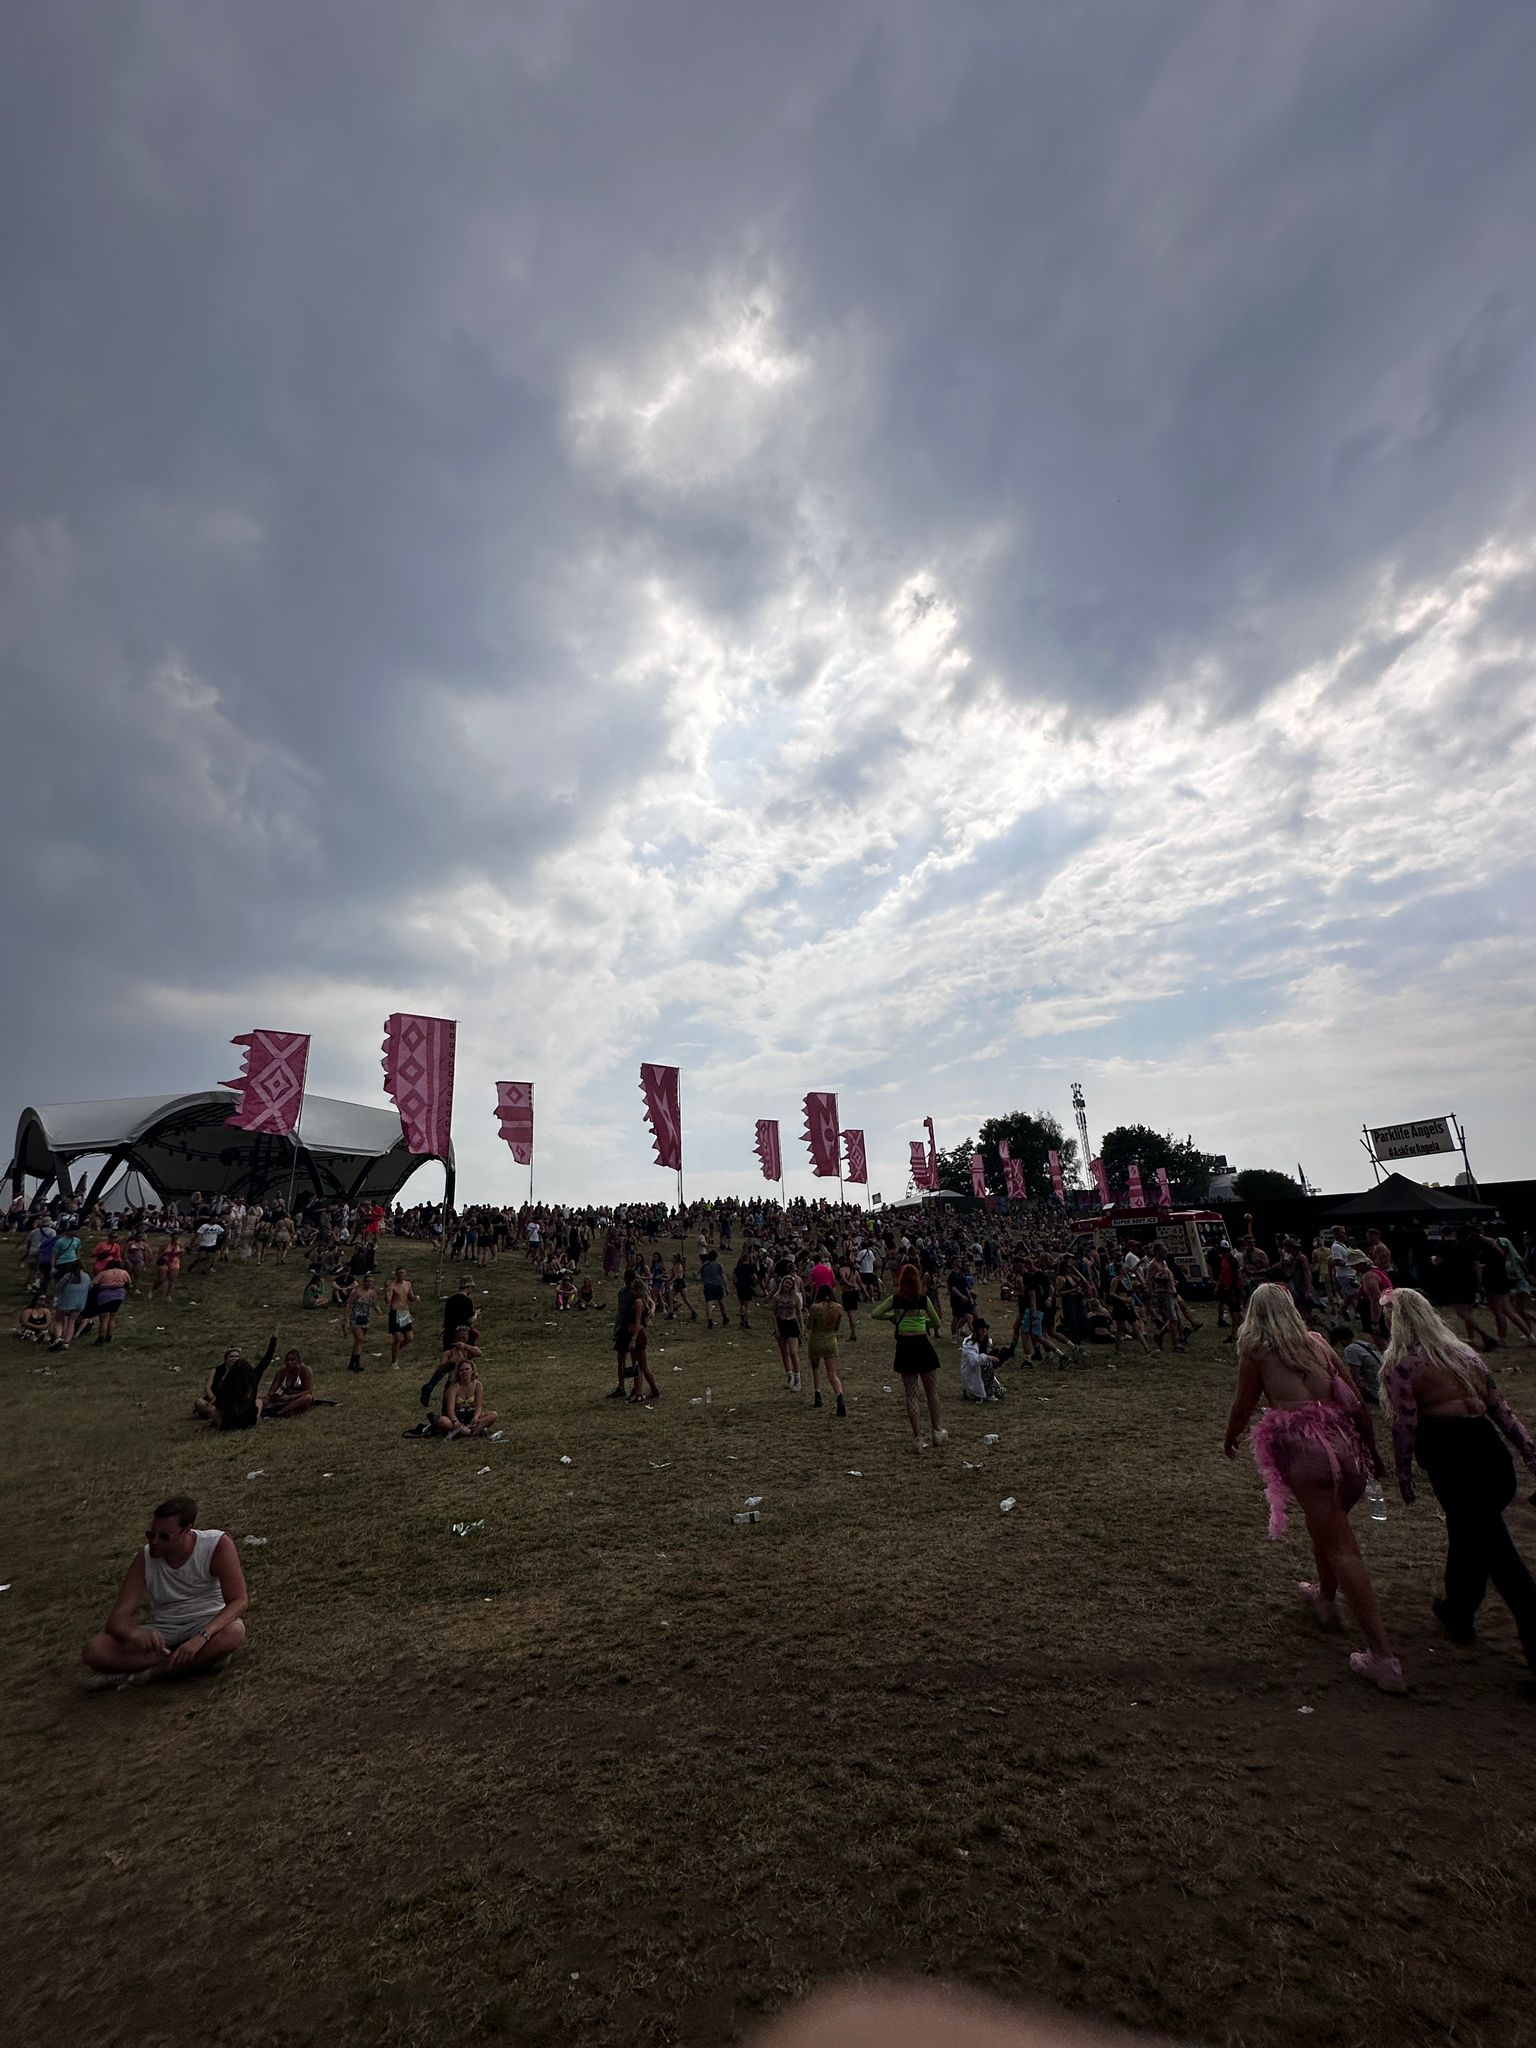 Photos of the thunder storm at Parklife